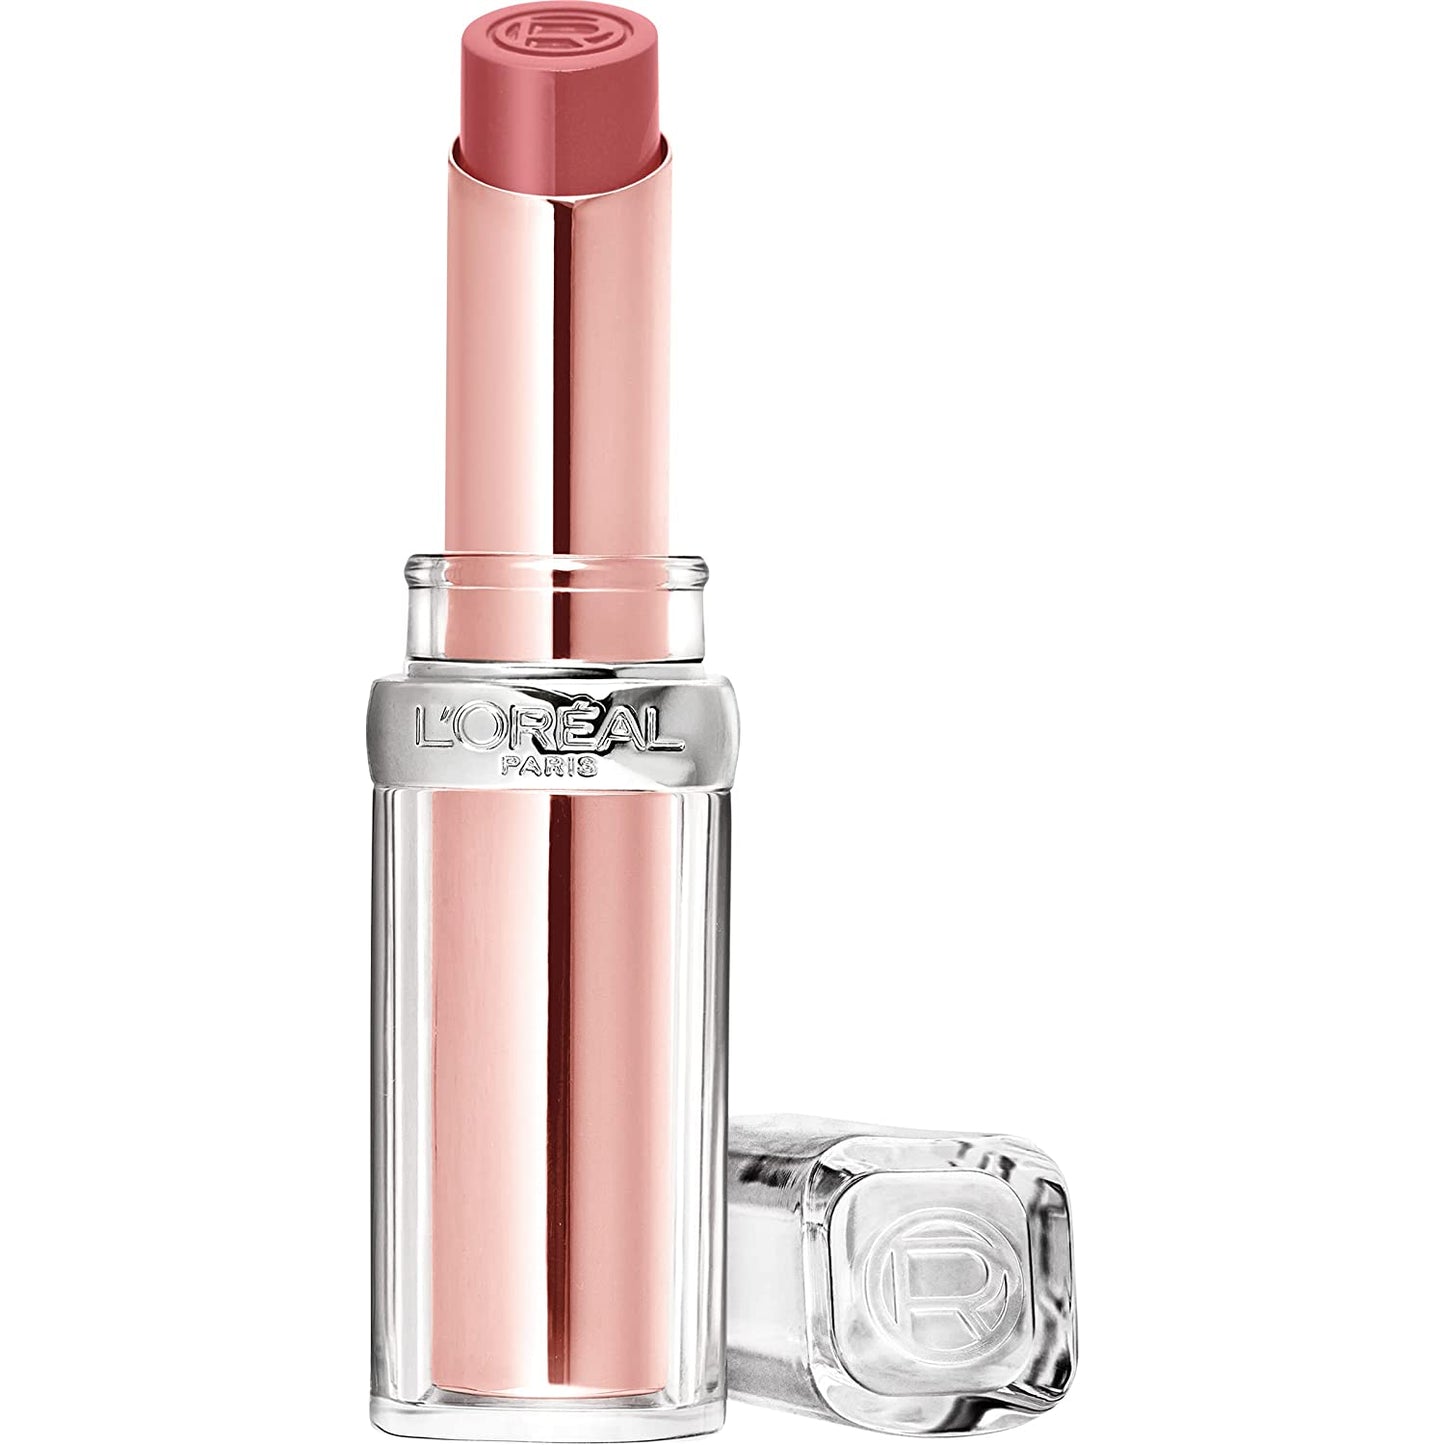 L'Oreal Paris Glow Paradise Hydrating Balm-in-Lipstick Cushiony balm with pomegranate extract 0.01Oz